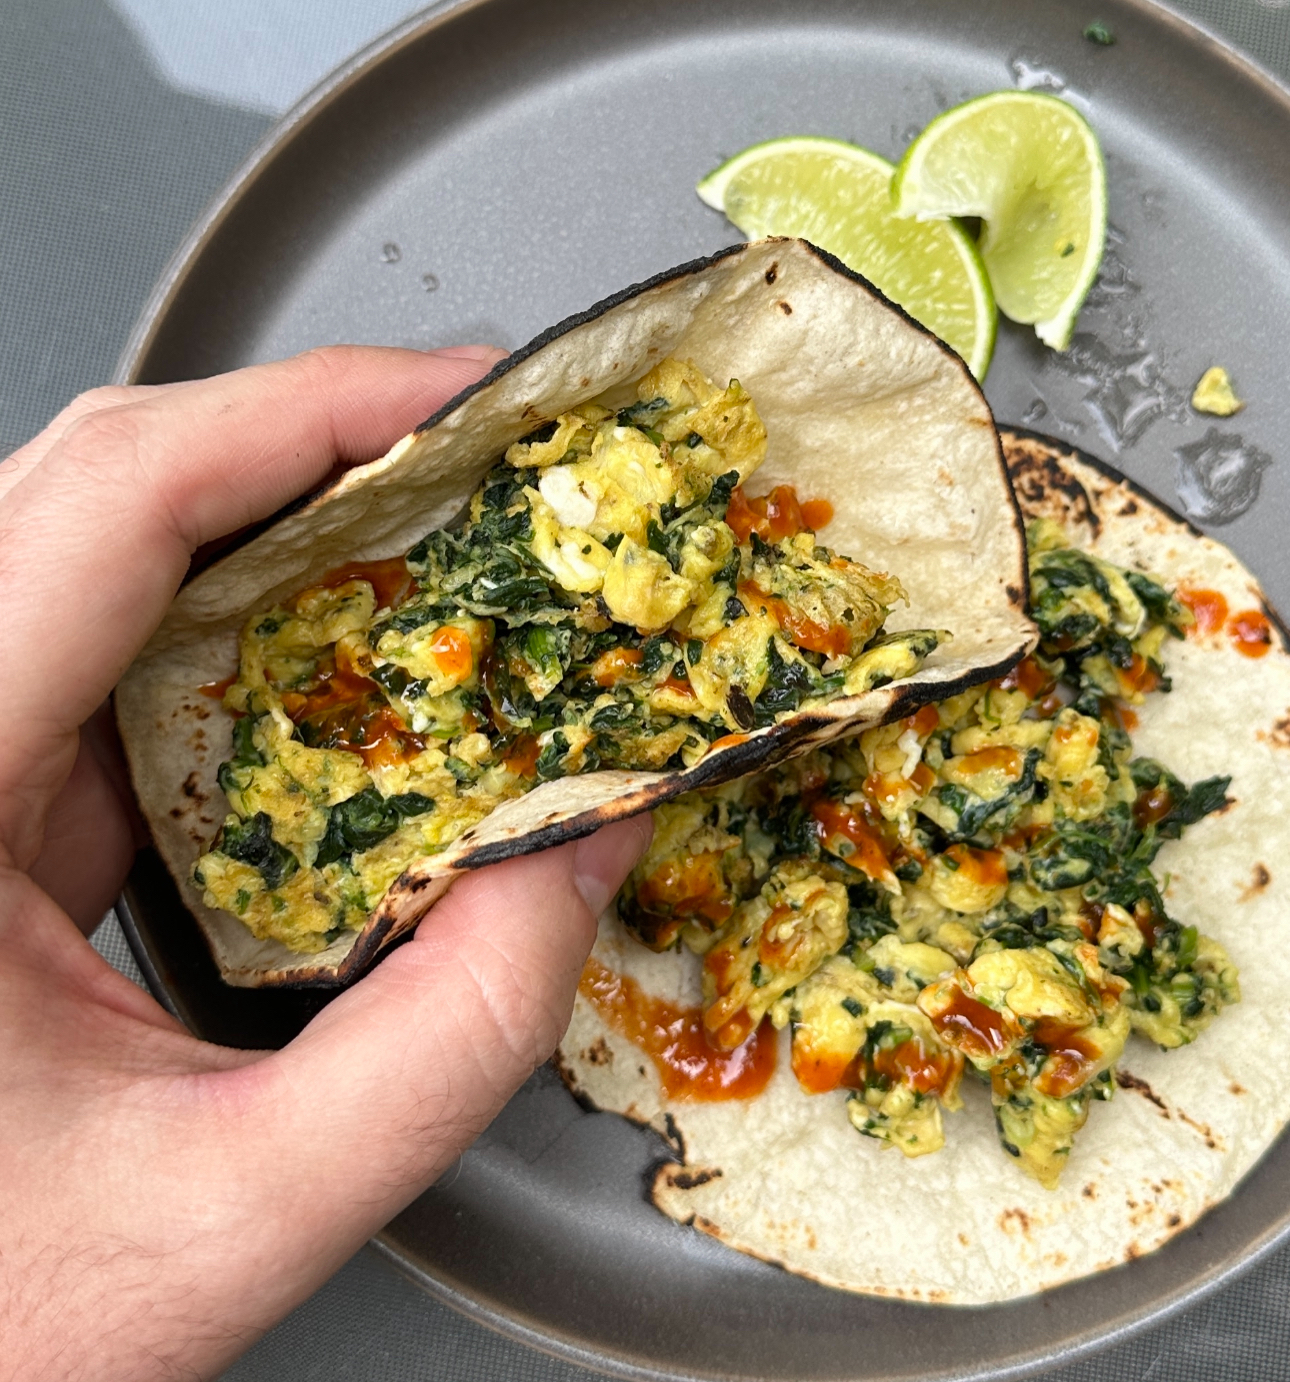 Hand holding a taco filled with scrambled eggs and spinach, with a lime wedge on the side